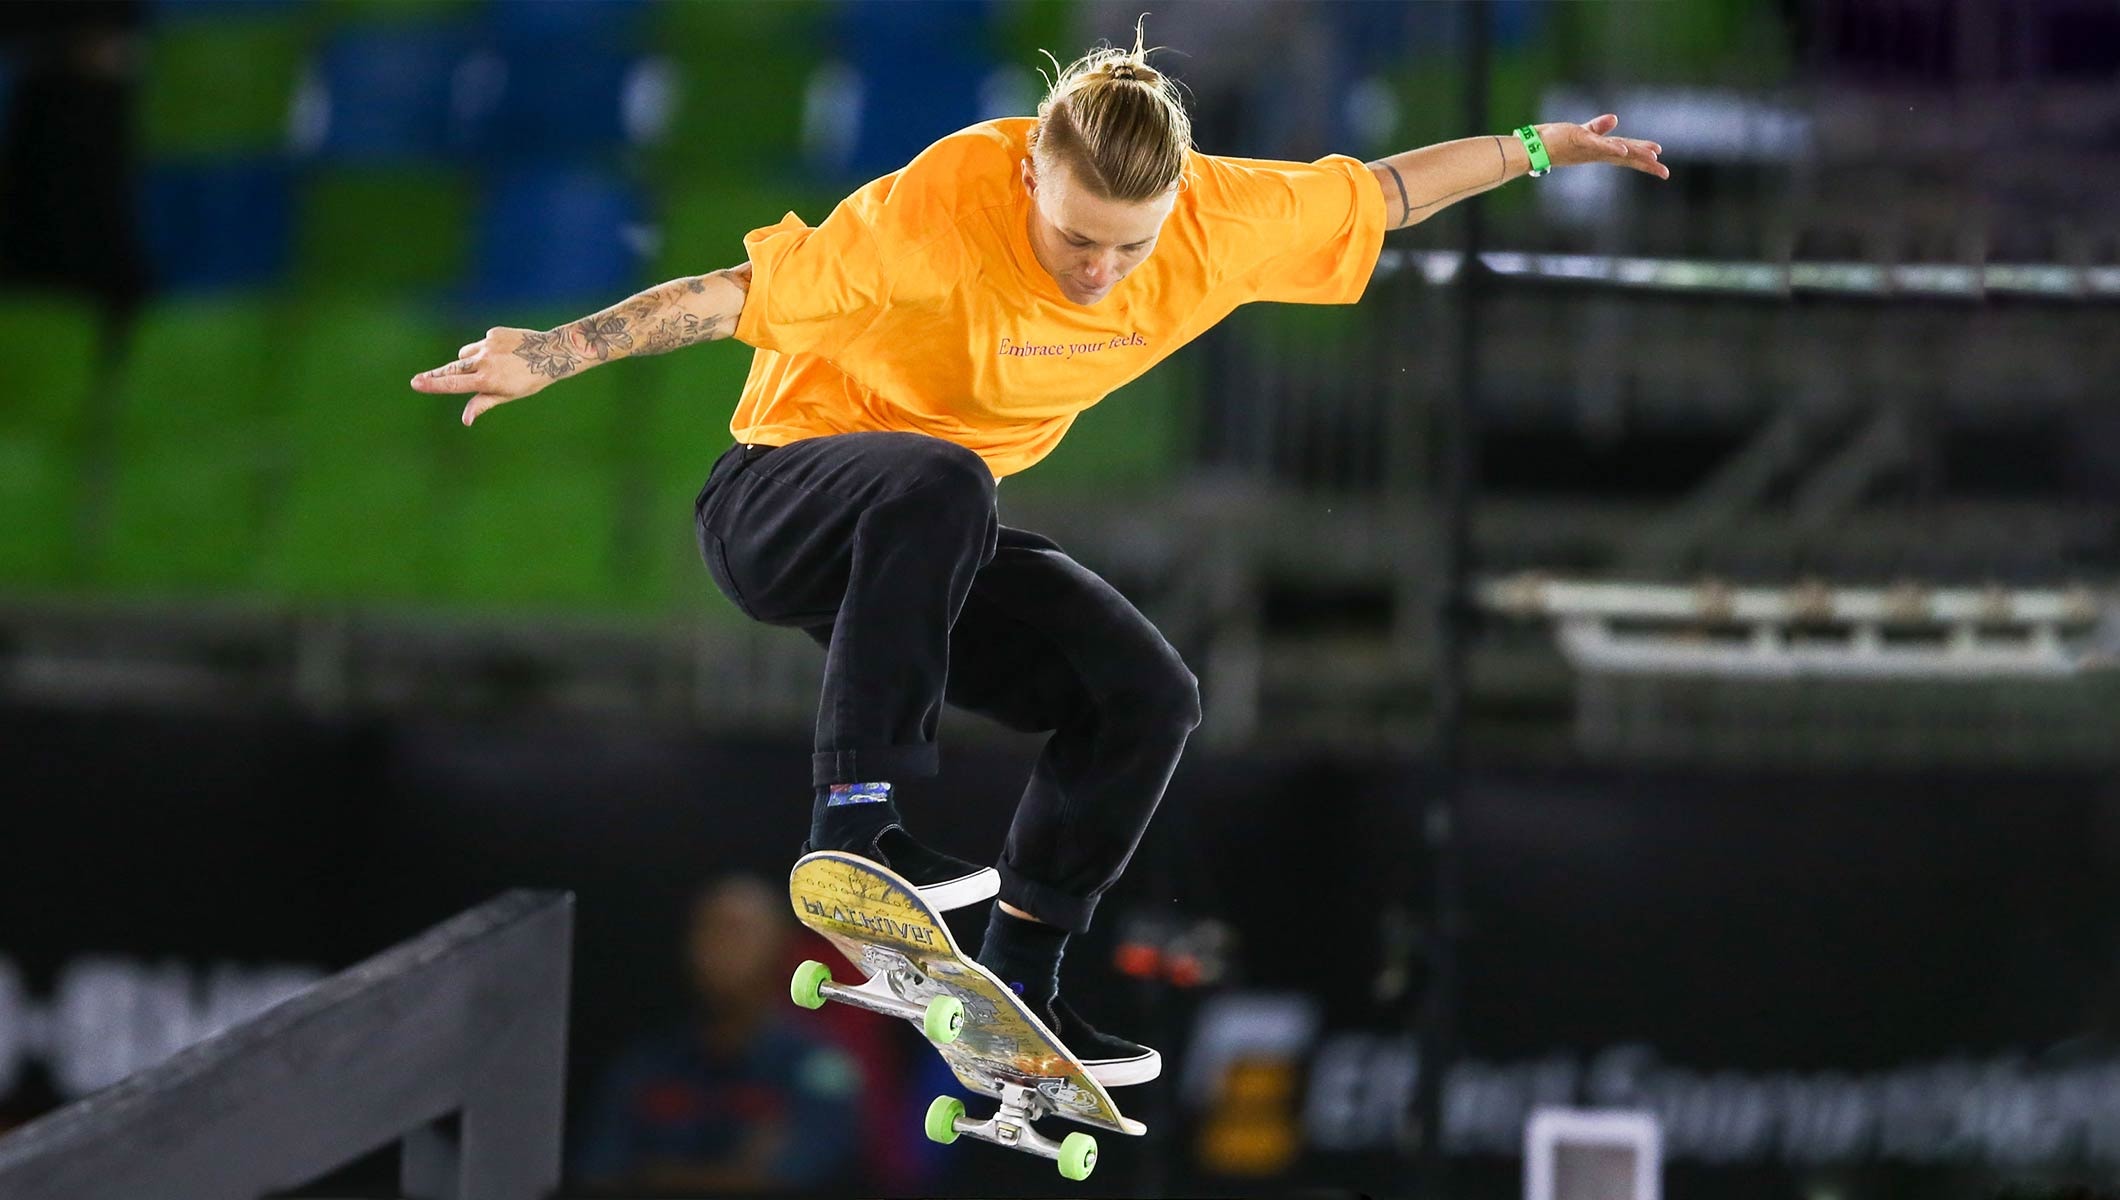 Kalmte Wegversperring Kritisch Olympic Channel Podcast: Skateboarder Candy Jacobs talks Tony Hawk deal,  Tokyo 2020, and more - Olympic News